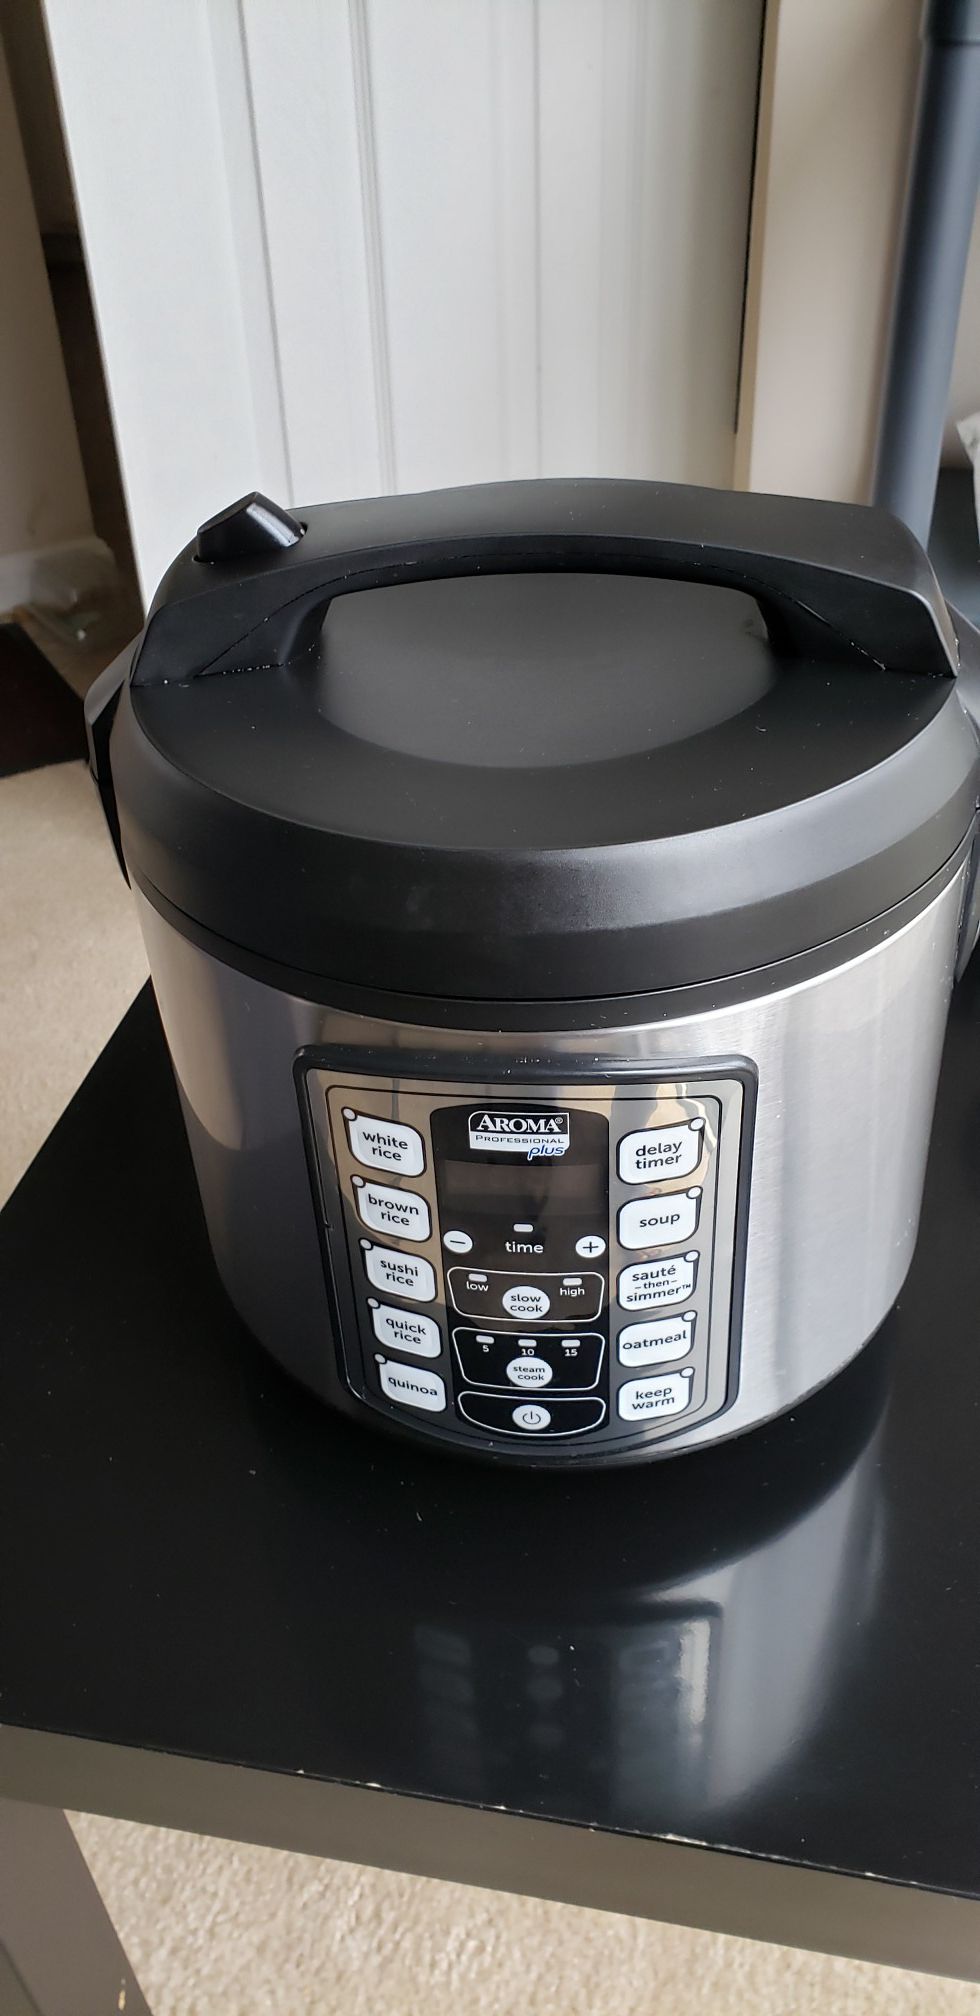 Aroma professional plus rice cooker 20 cup